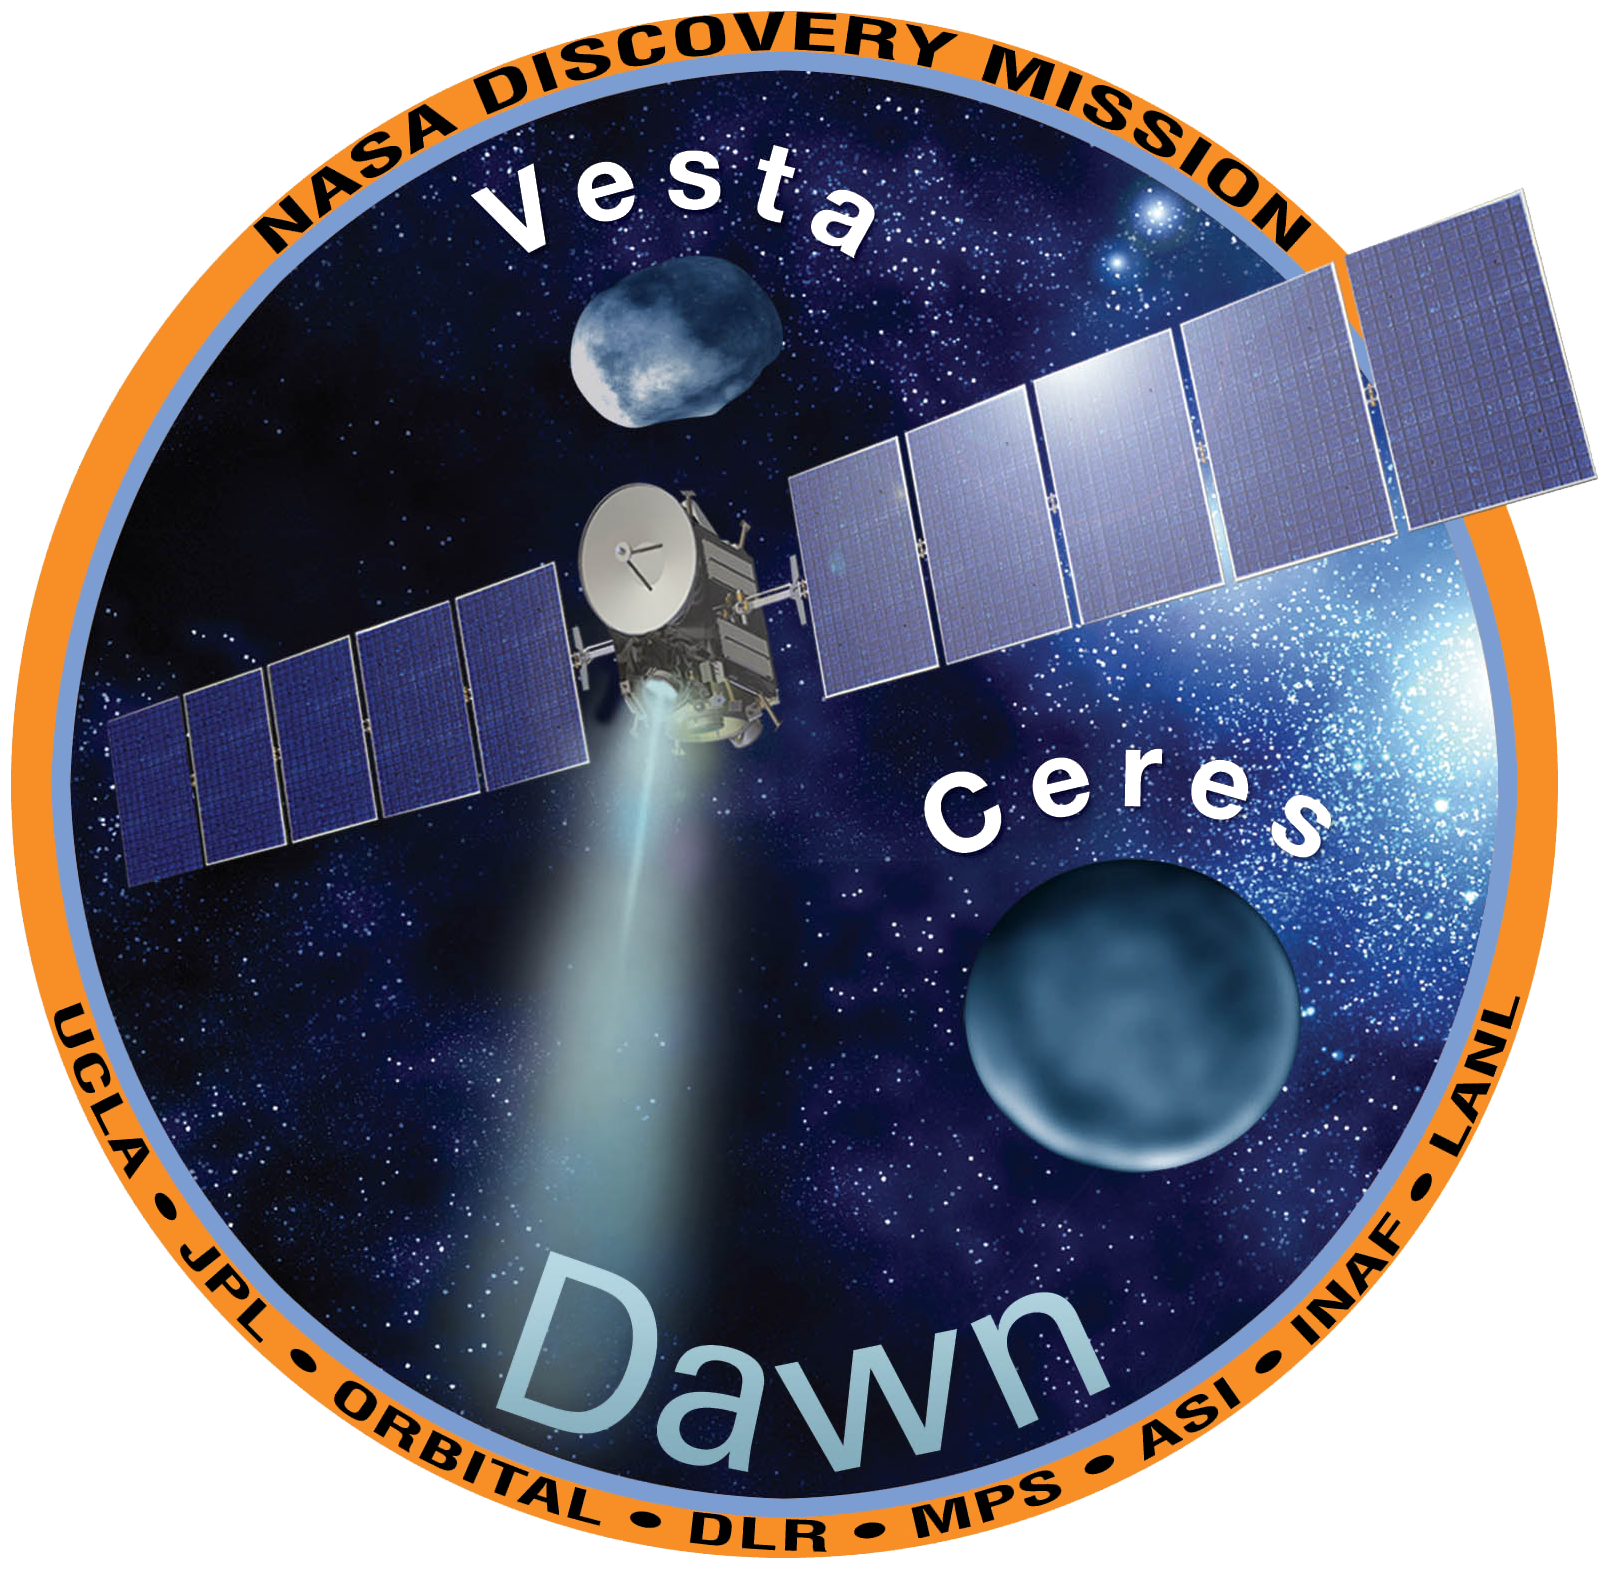 Dawn Mission patch shows the spacecraft and asteroid Vesta and dwarf planet Ceres.